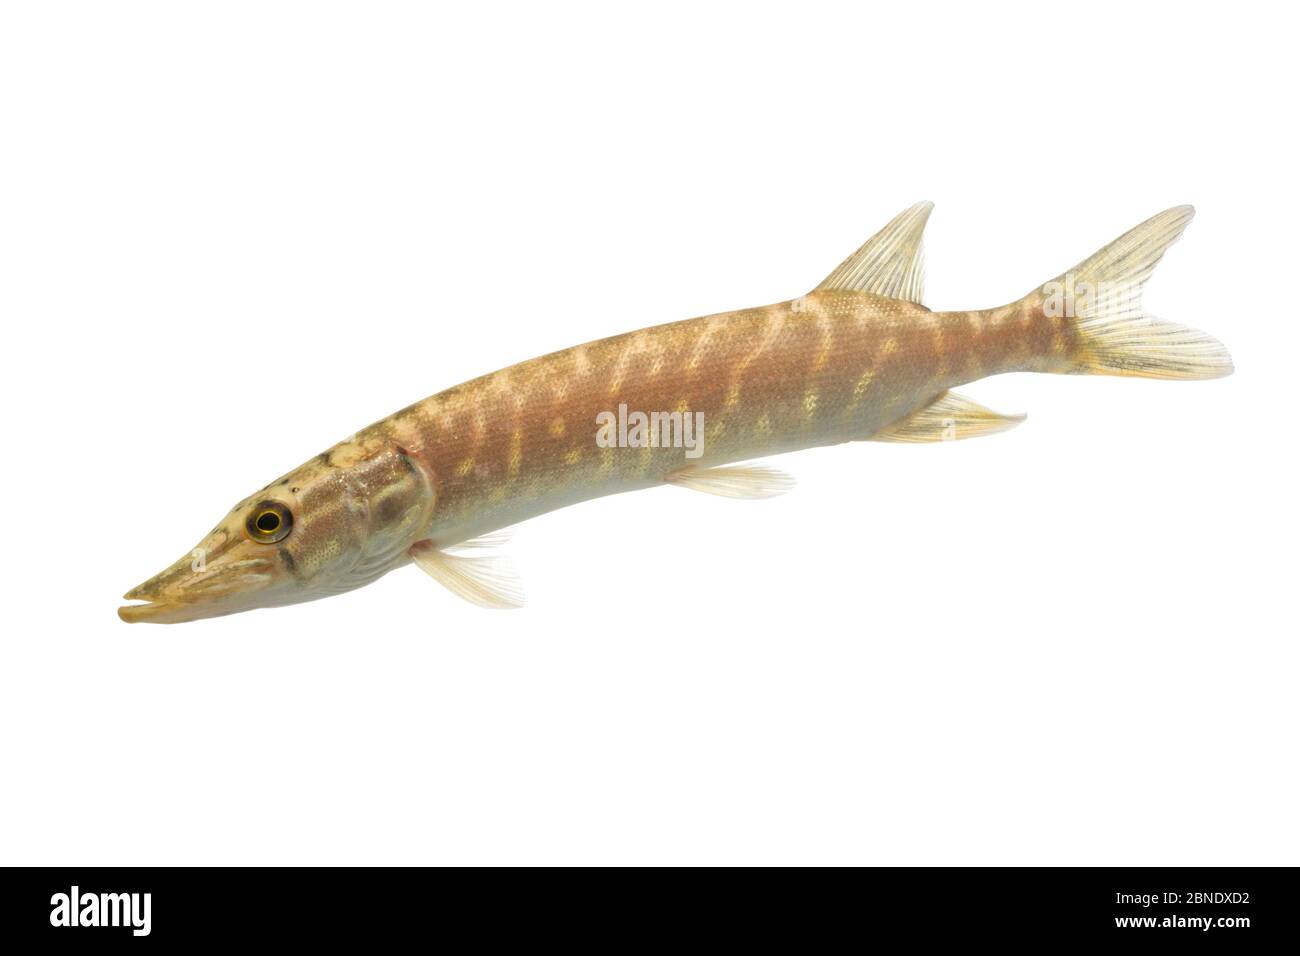 Northern Pike (Esox lucius) juvenile, The Netherlands, October, Meetyourneighbours.net project Stock Photo